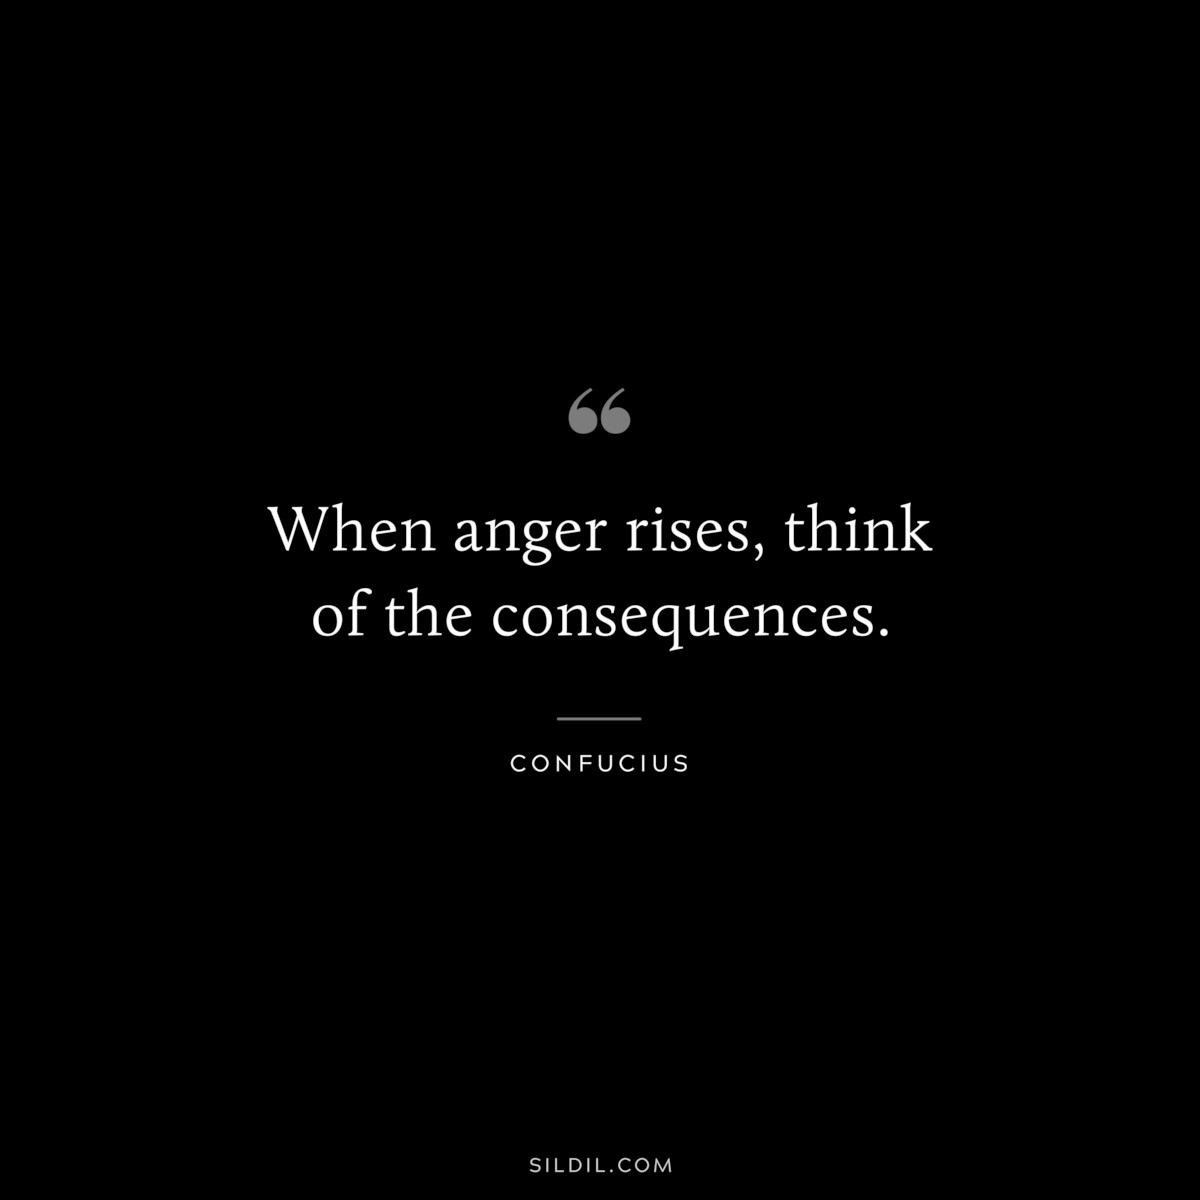 When anger rises, think of the consequences. ― Confucius